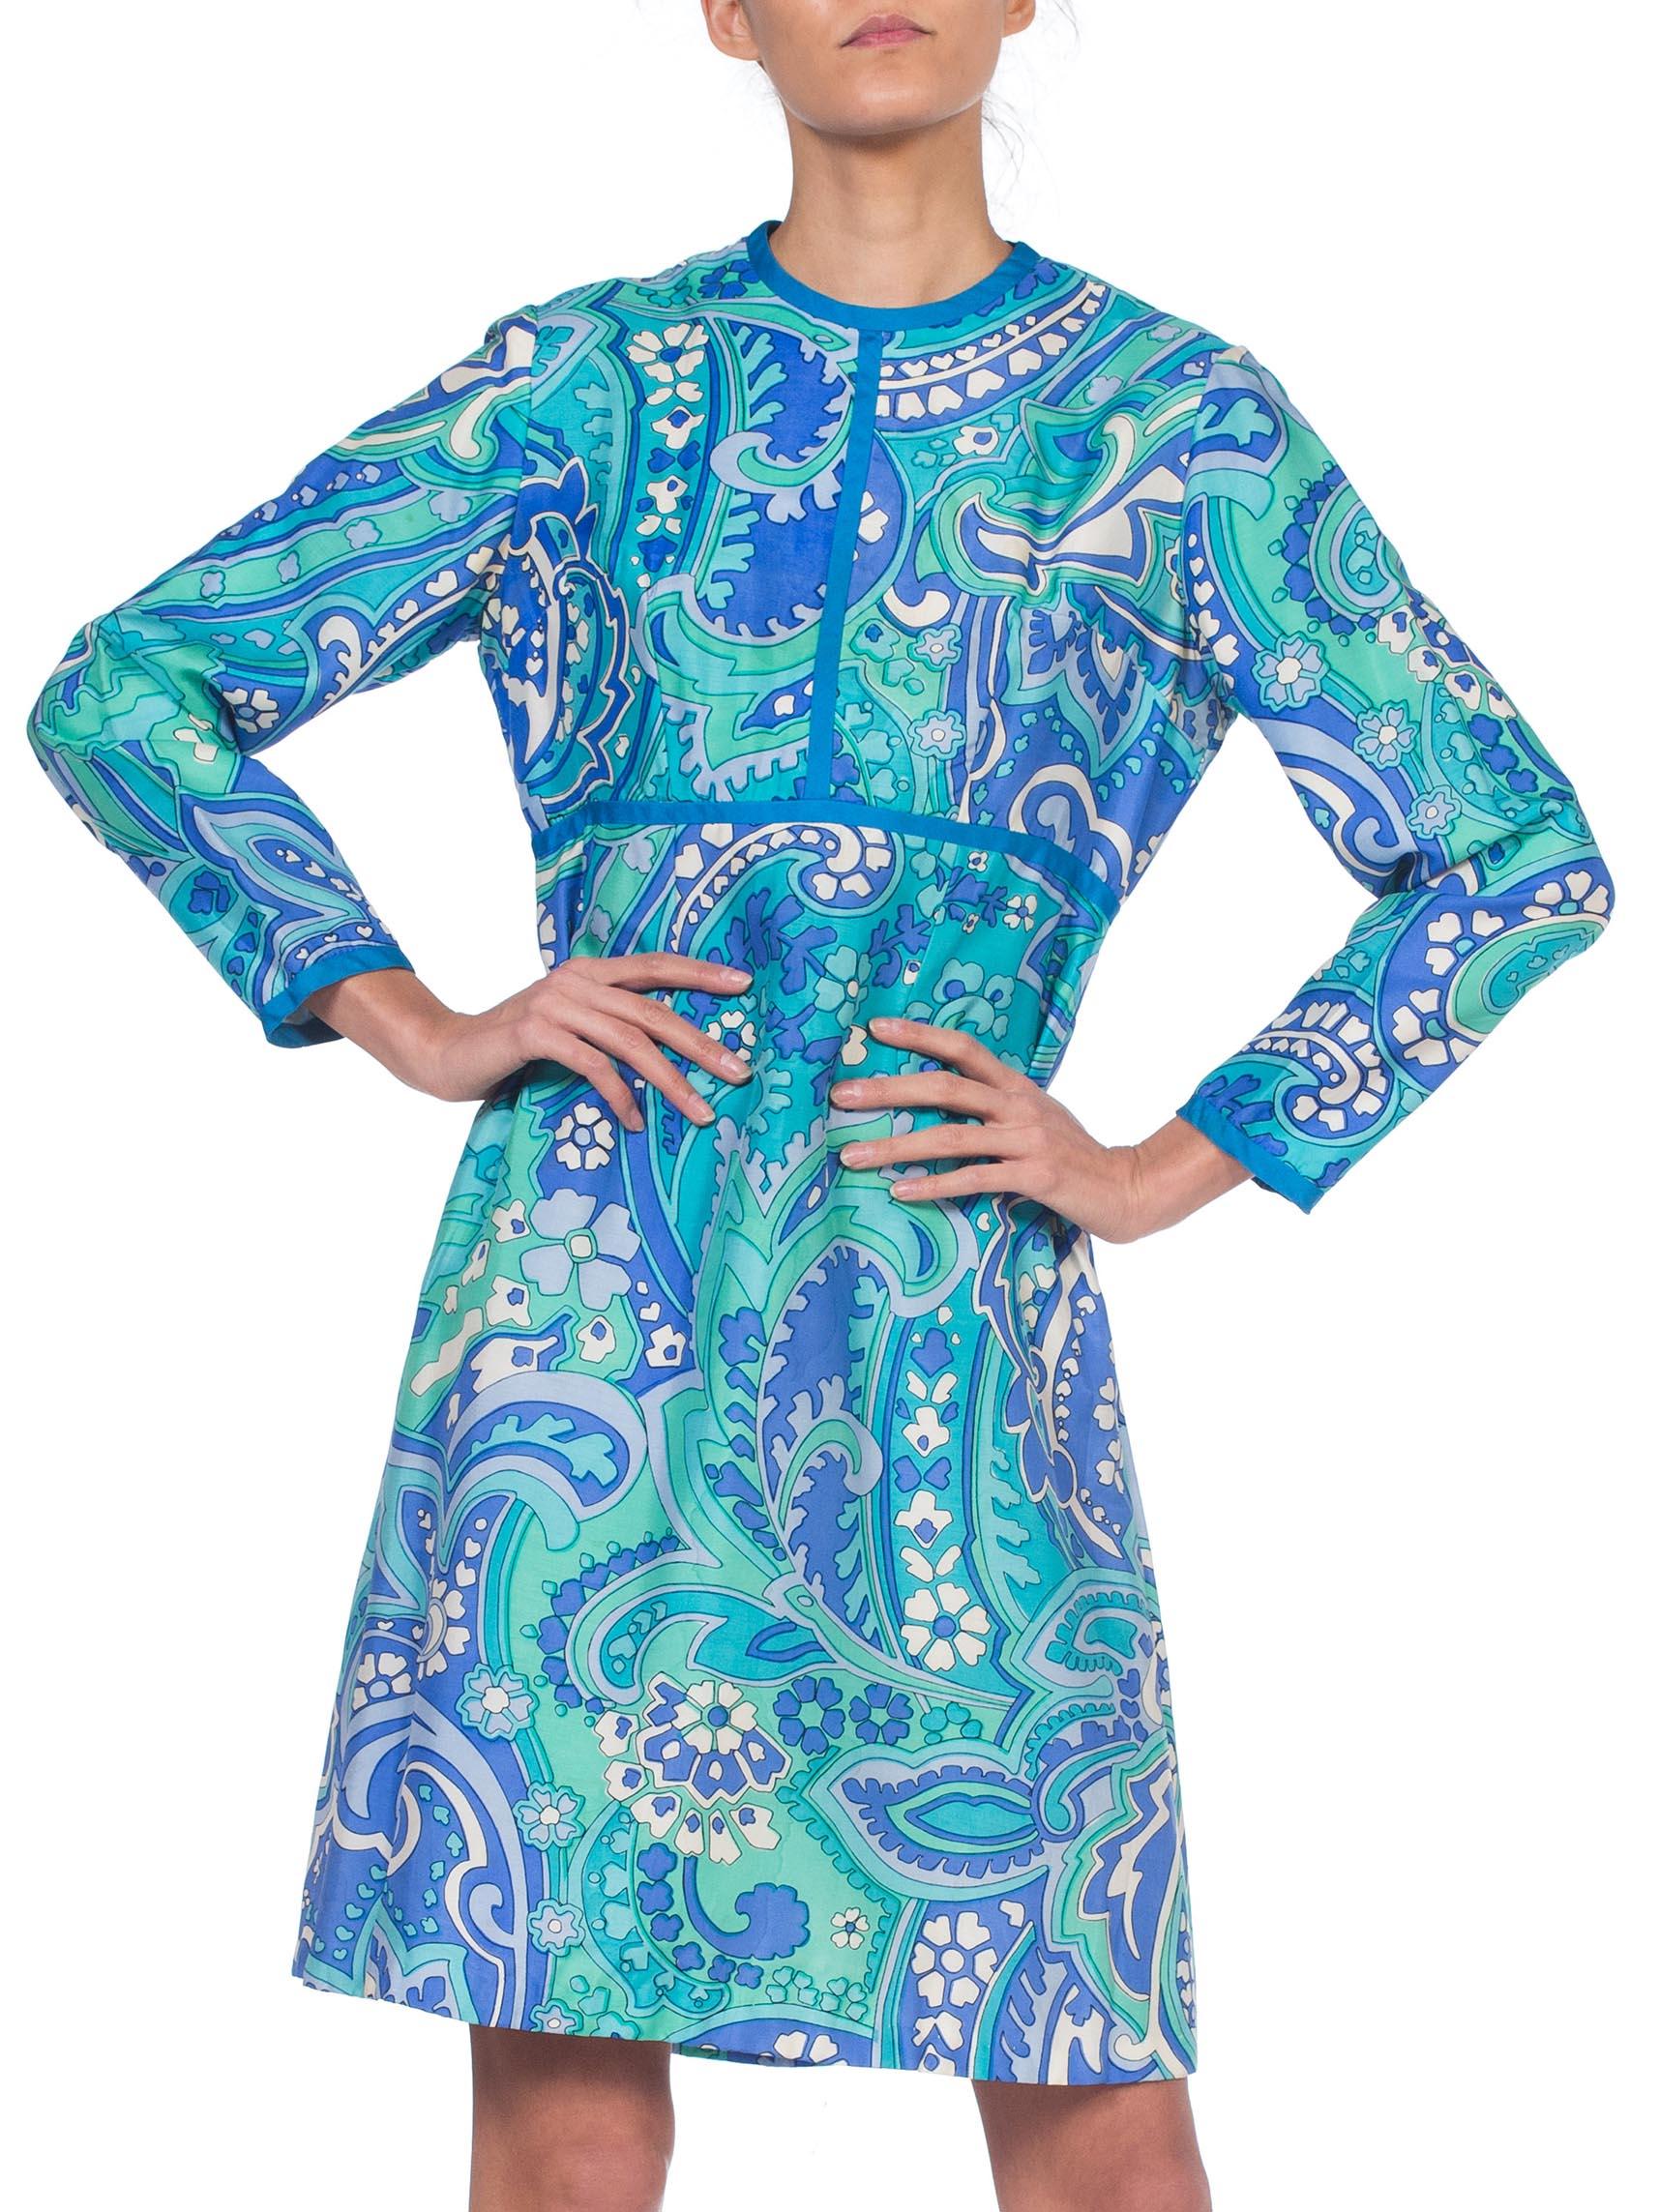 1960S I. MAGNIN Aqua  Psychedelic Silk Empire Waist Mod Long Sleeve Dress In Excellent Condition For Sale In New York, NY